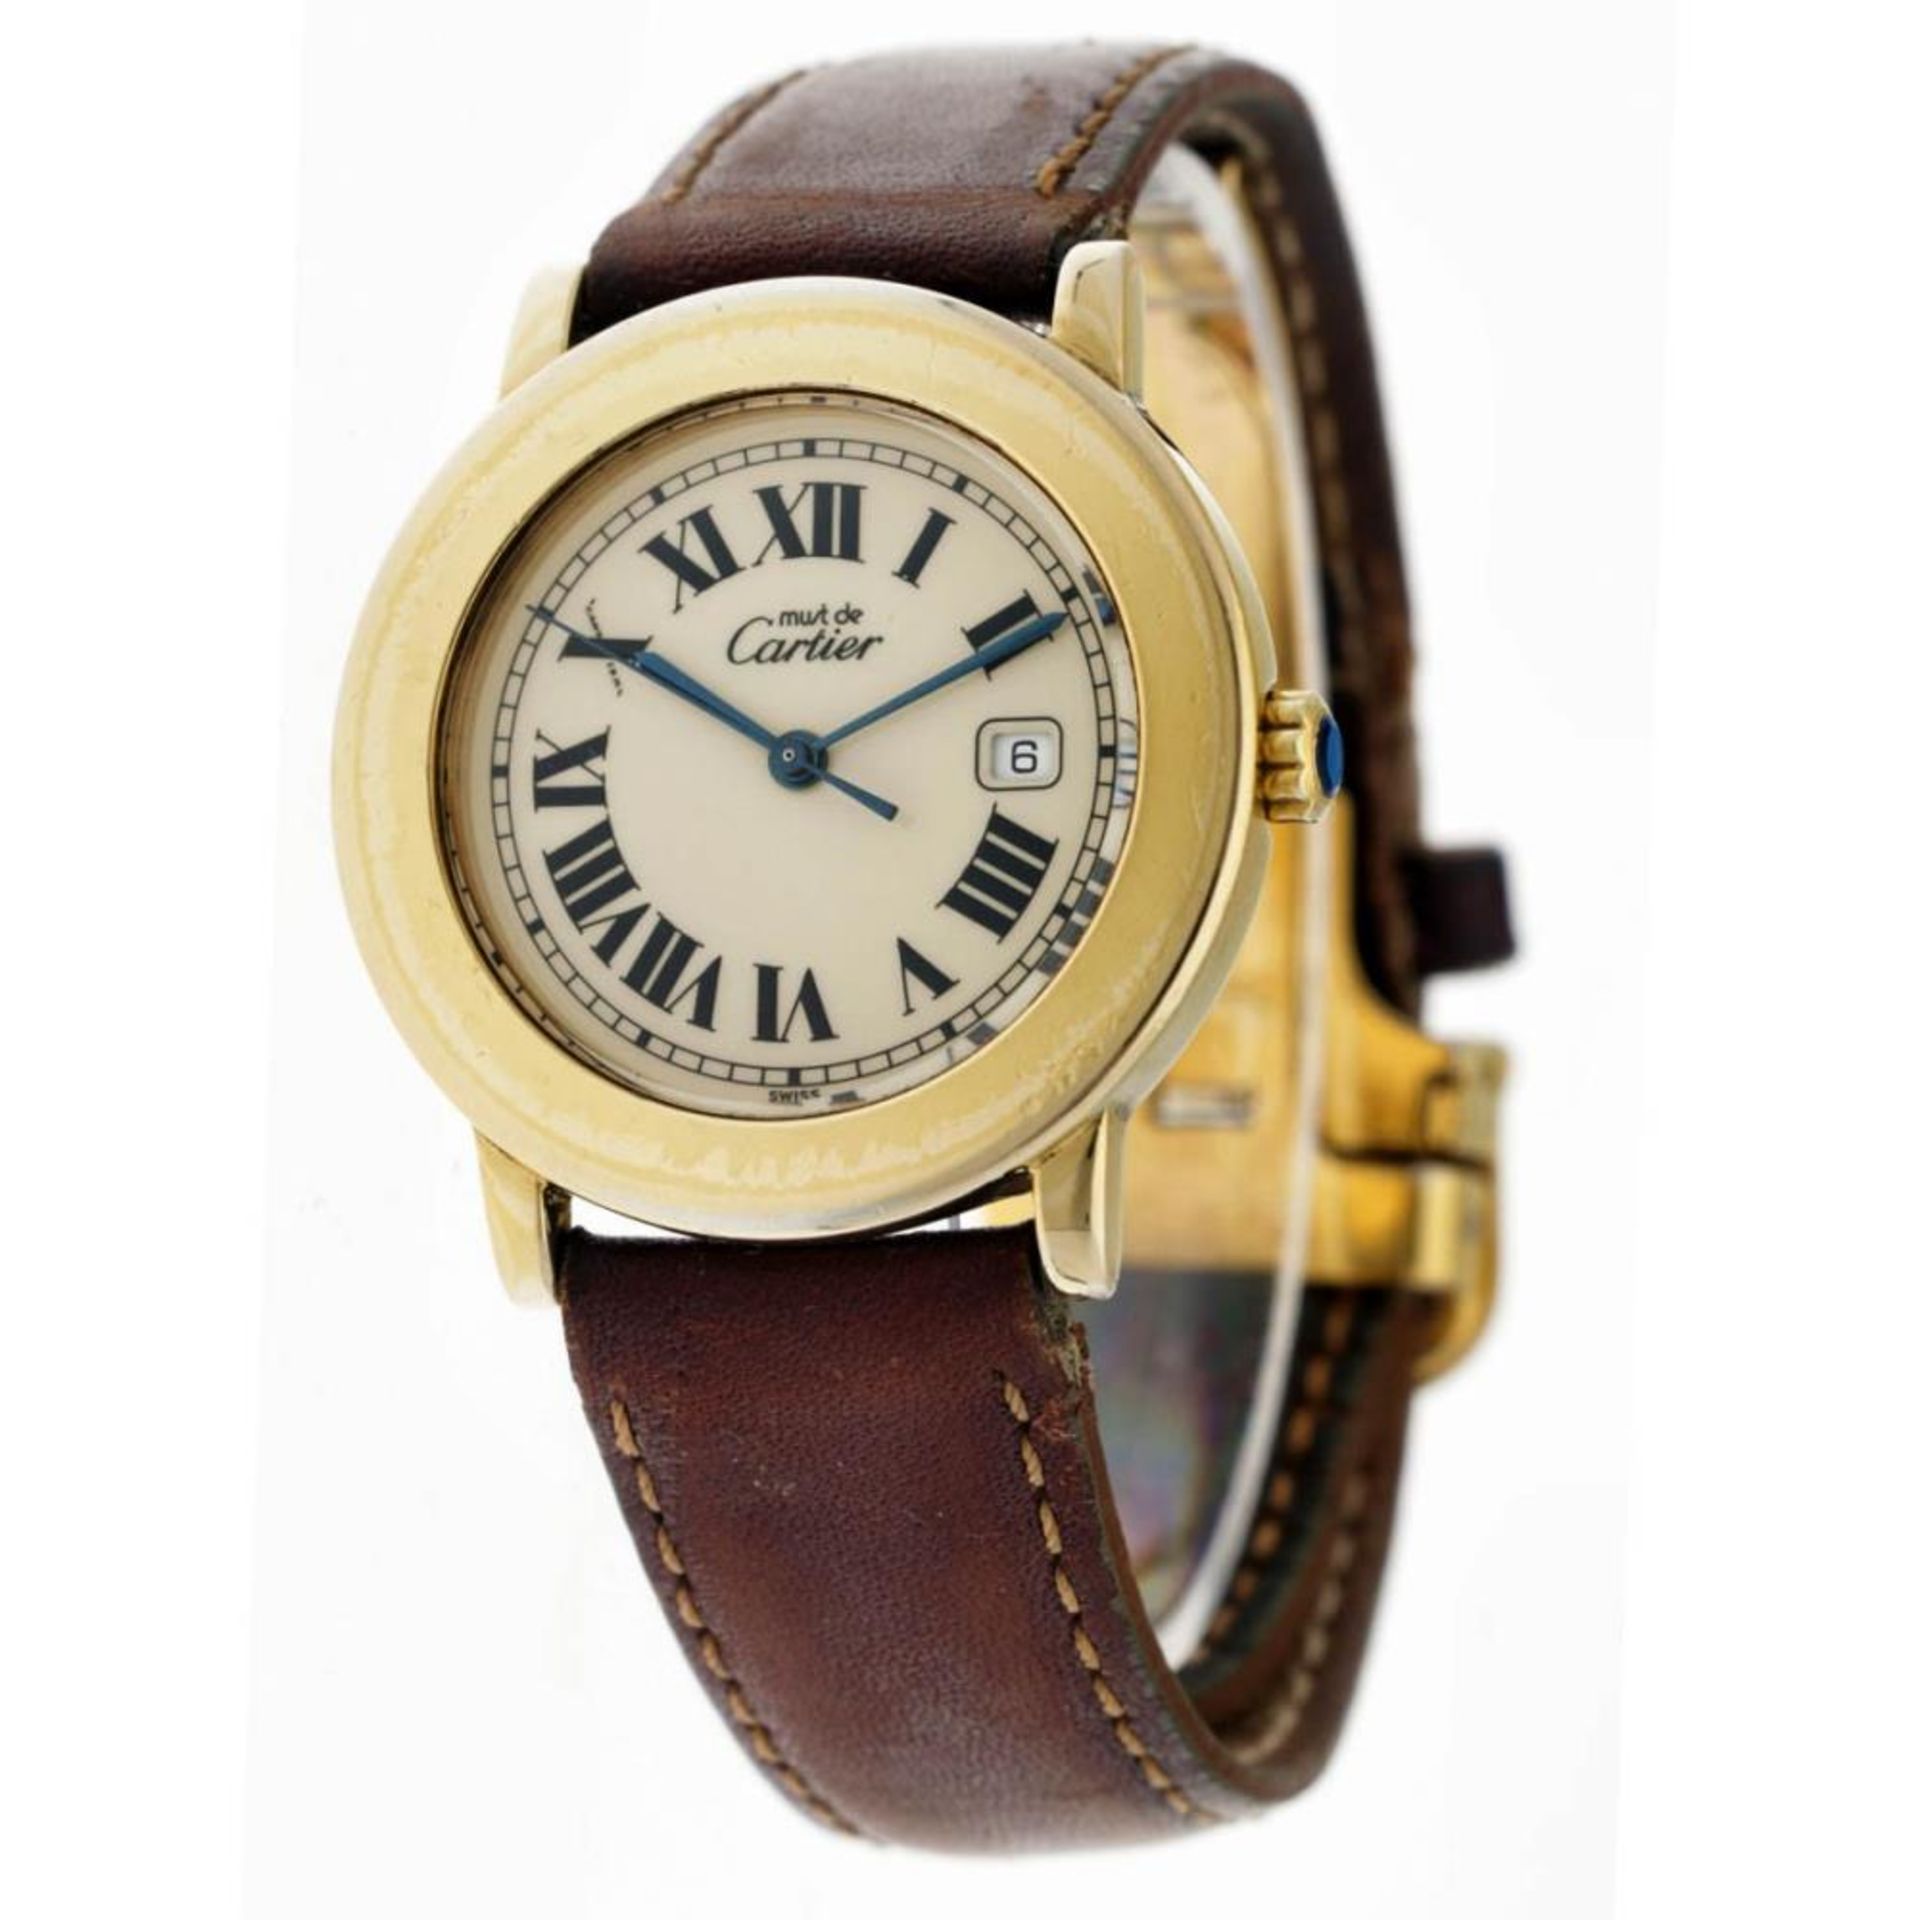 Cartier Ronde 1800.1 - Ladies watch - approx. 1995. - Image 3 of 10